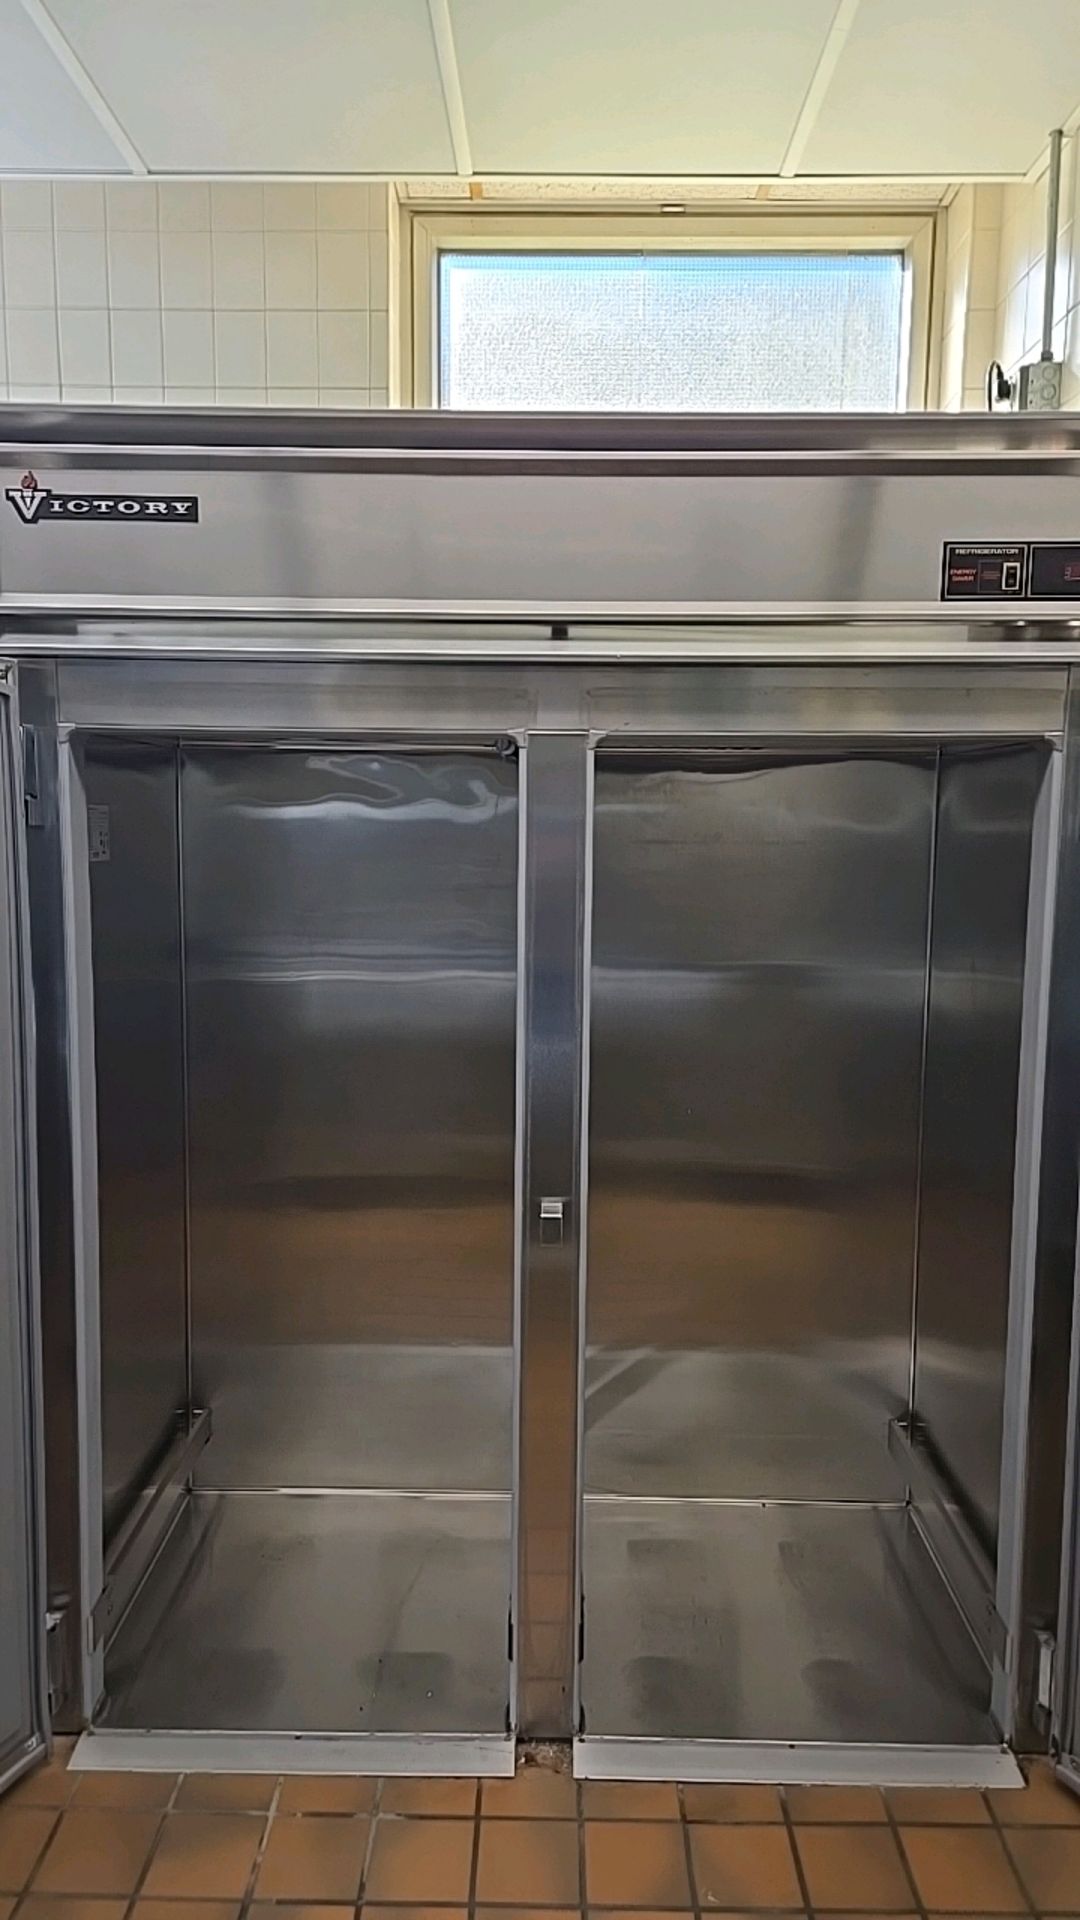 VICTORY RIS-2D-S7 ONE-SECTION, TWO-DOOR REFRIGERATOR - Image 3 of 7